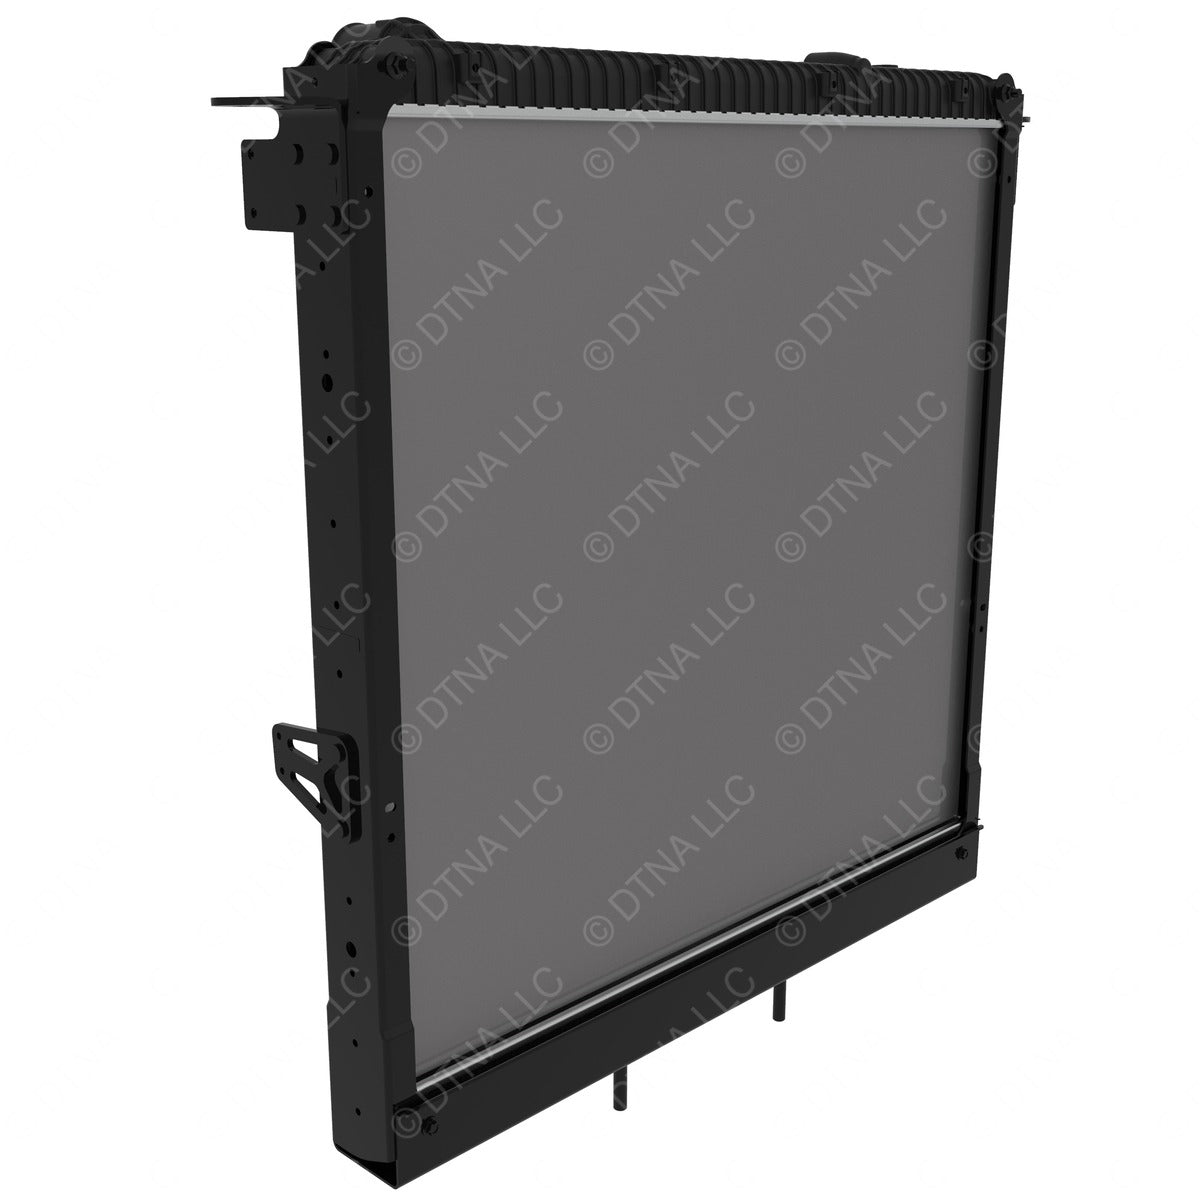 05-37145-000 -RADIATOR ASSEMBLY - COMPLETE